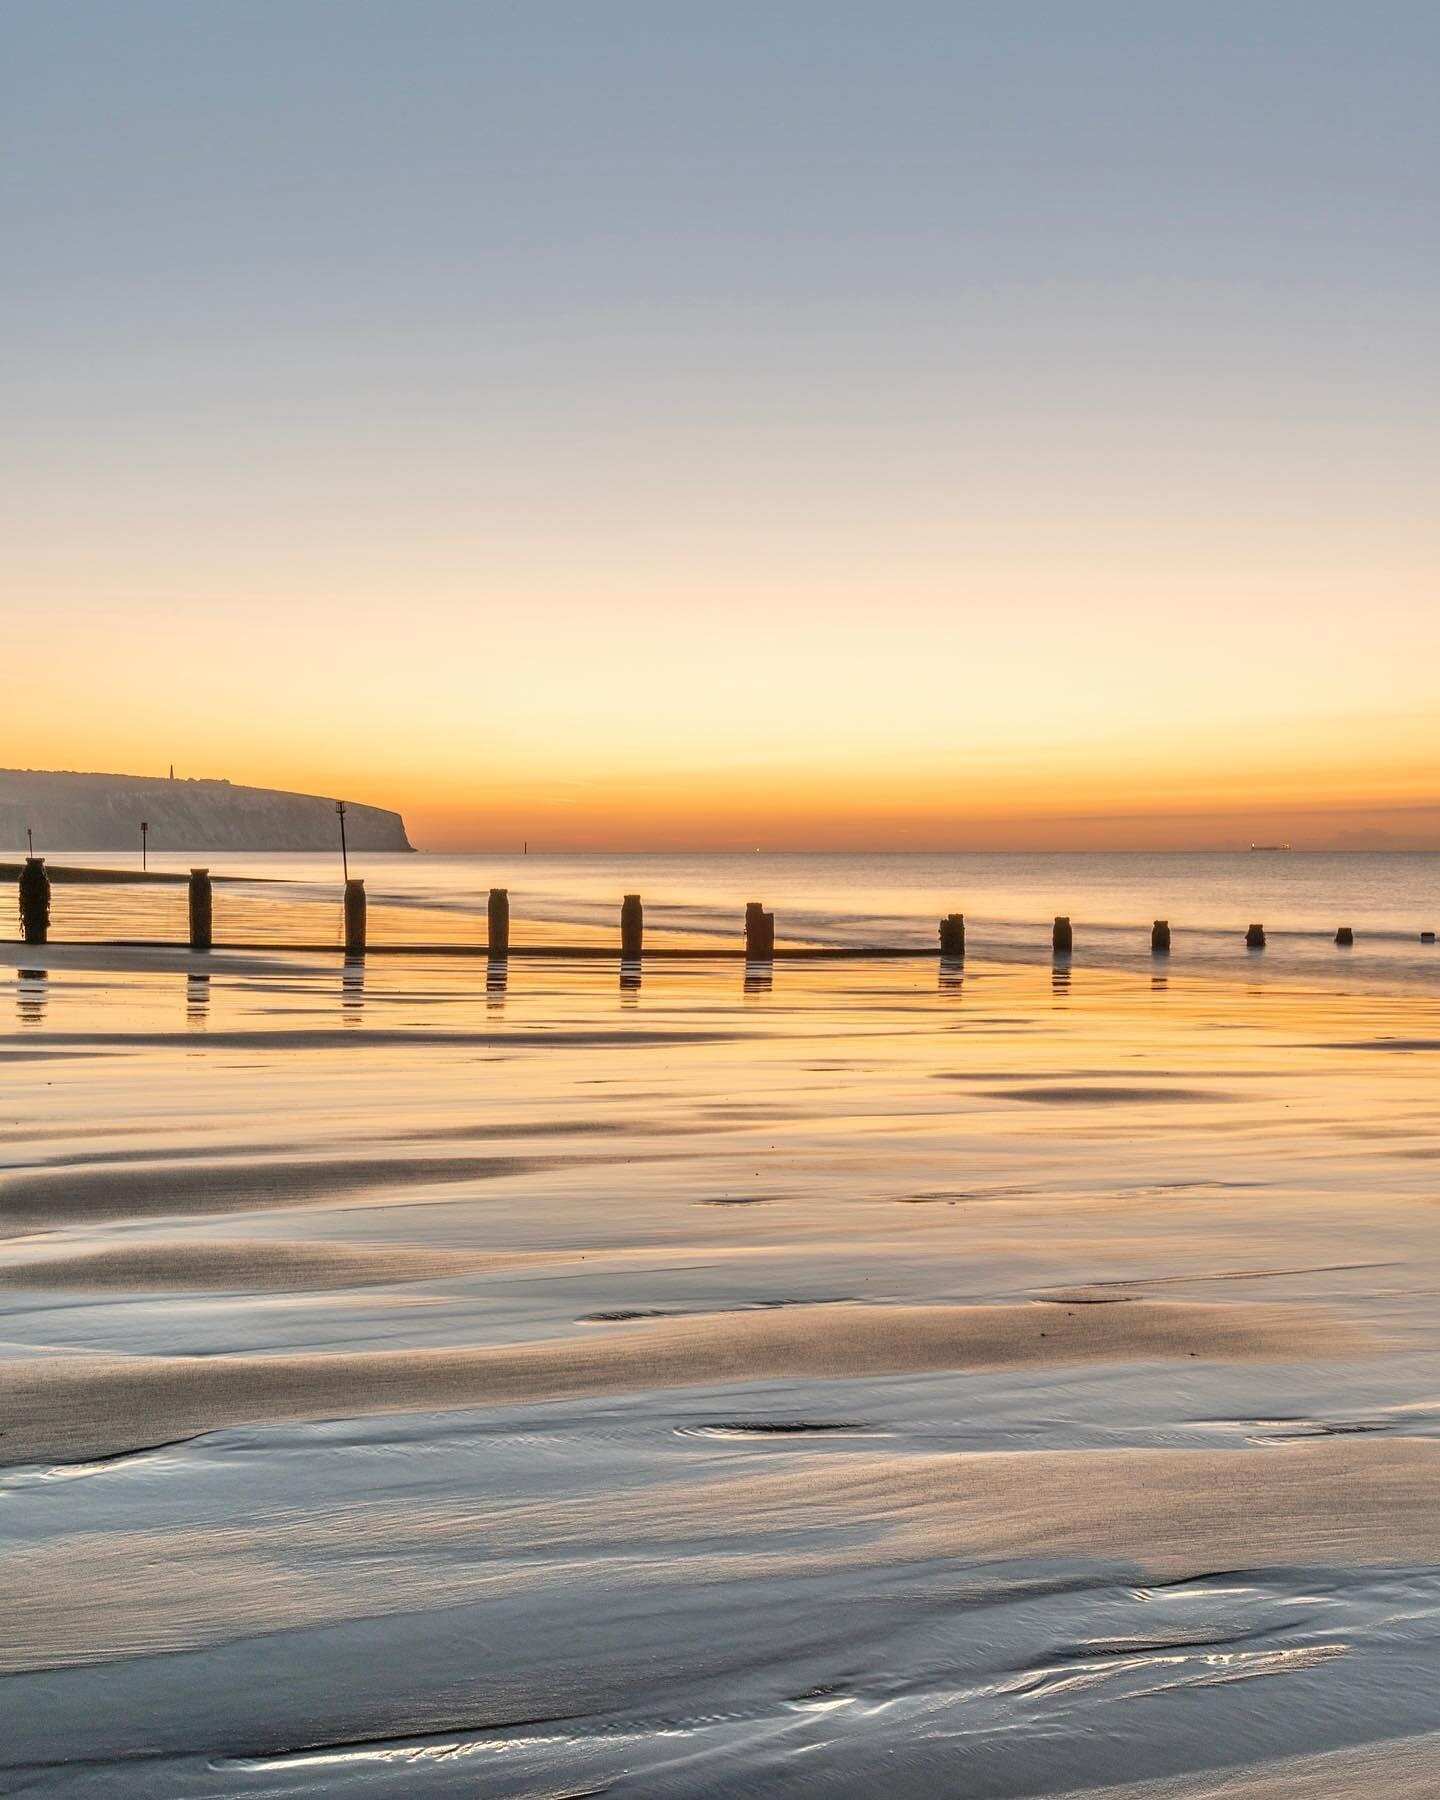 Sunrise at Sandown in the Isle of Wight